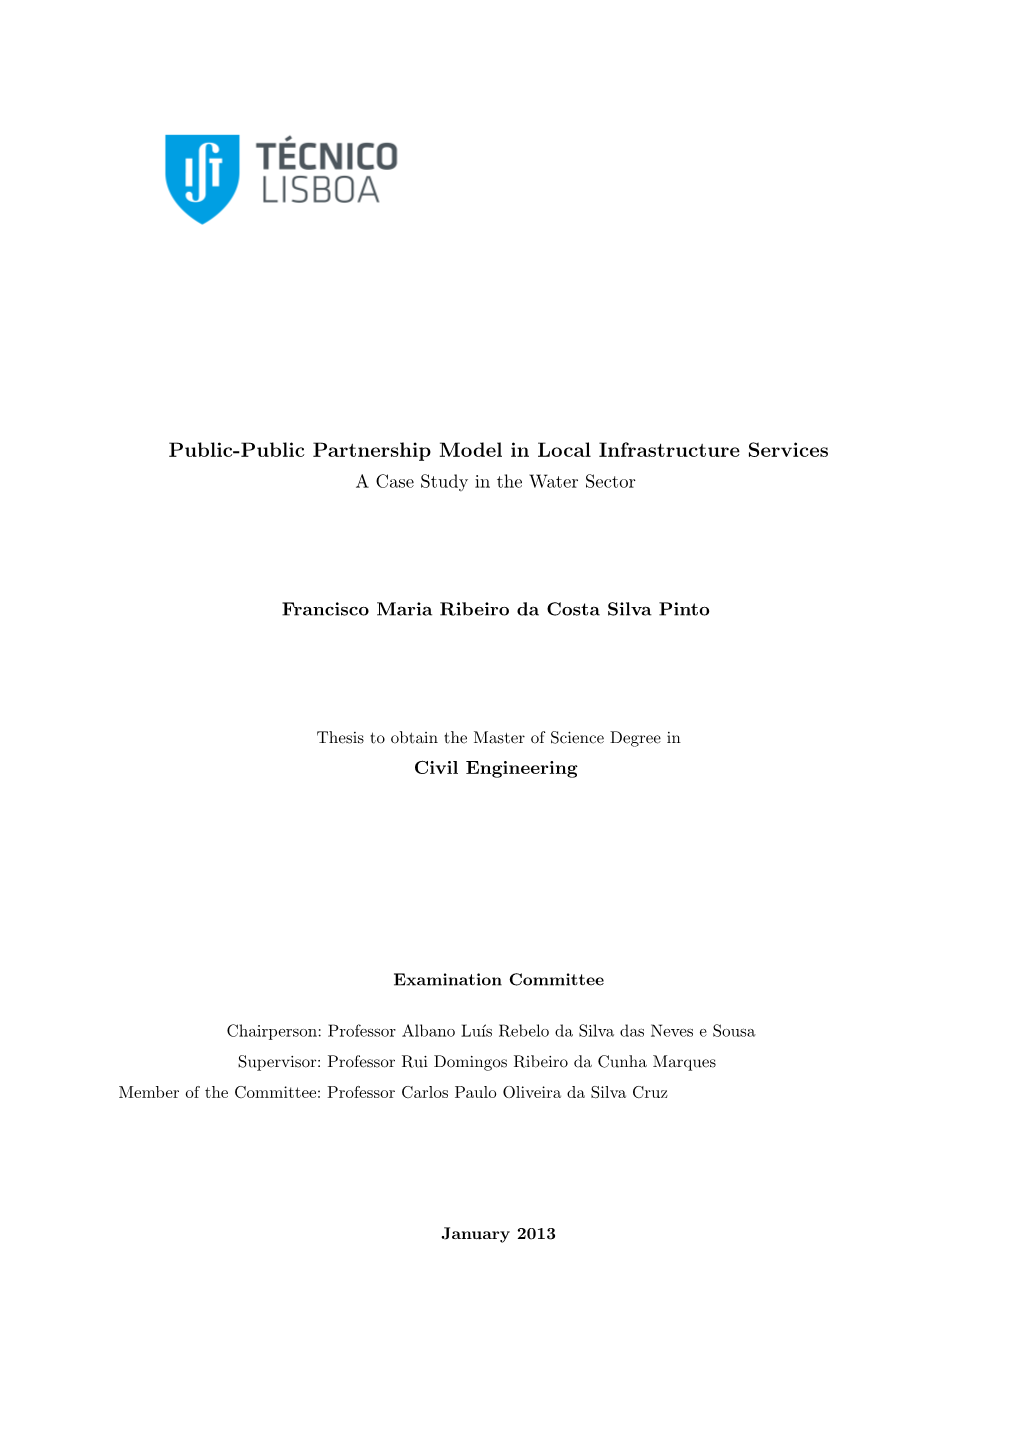 Public-Public Partnership Model in Local Infrastructure Services a Case Study in the Water Sector